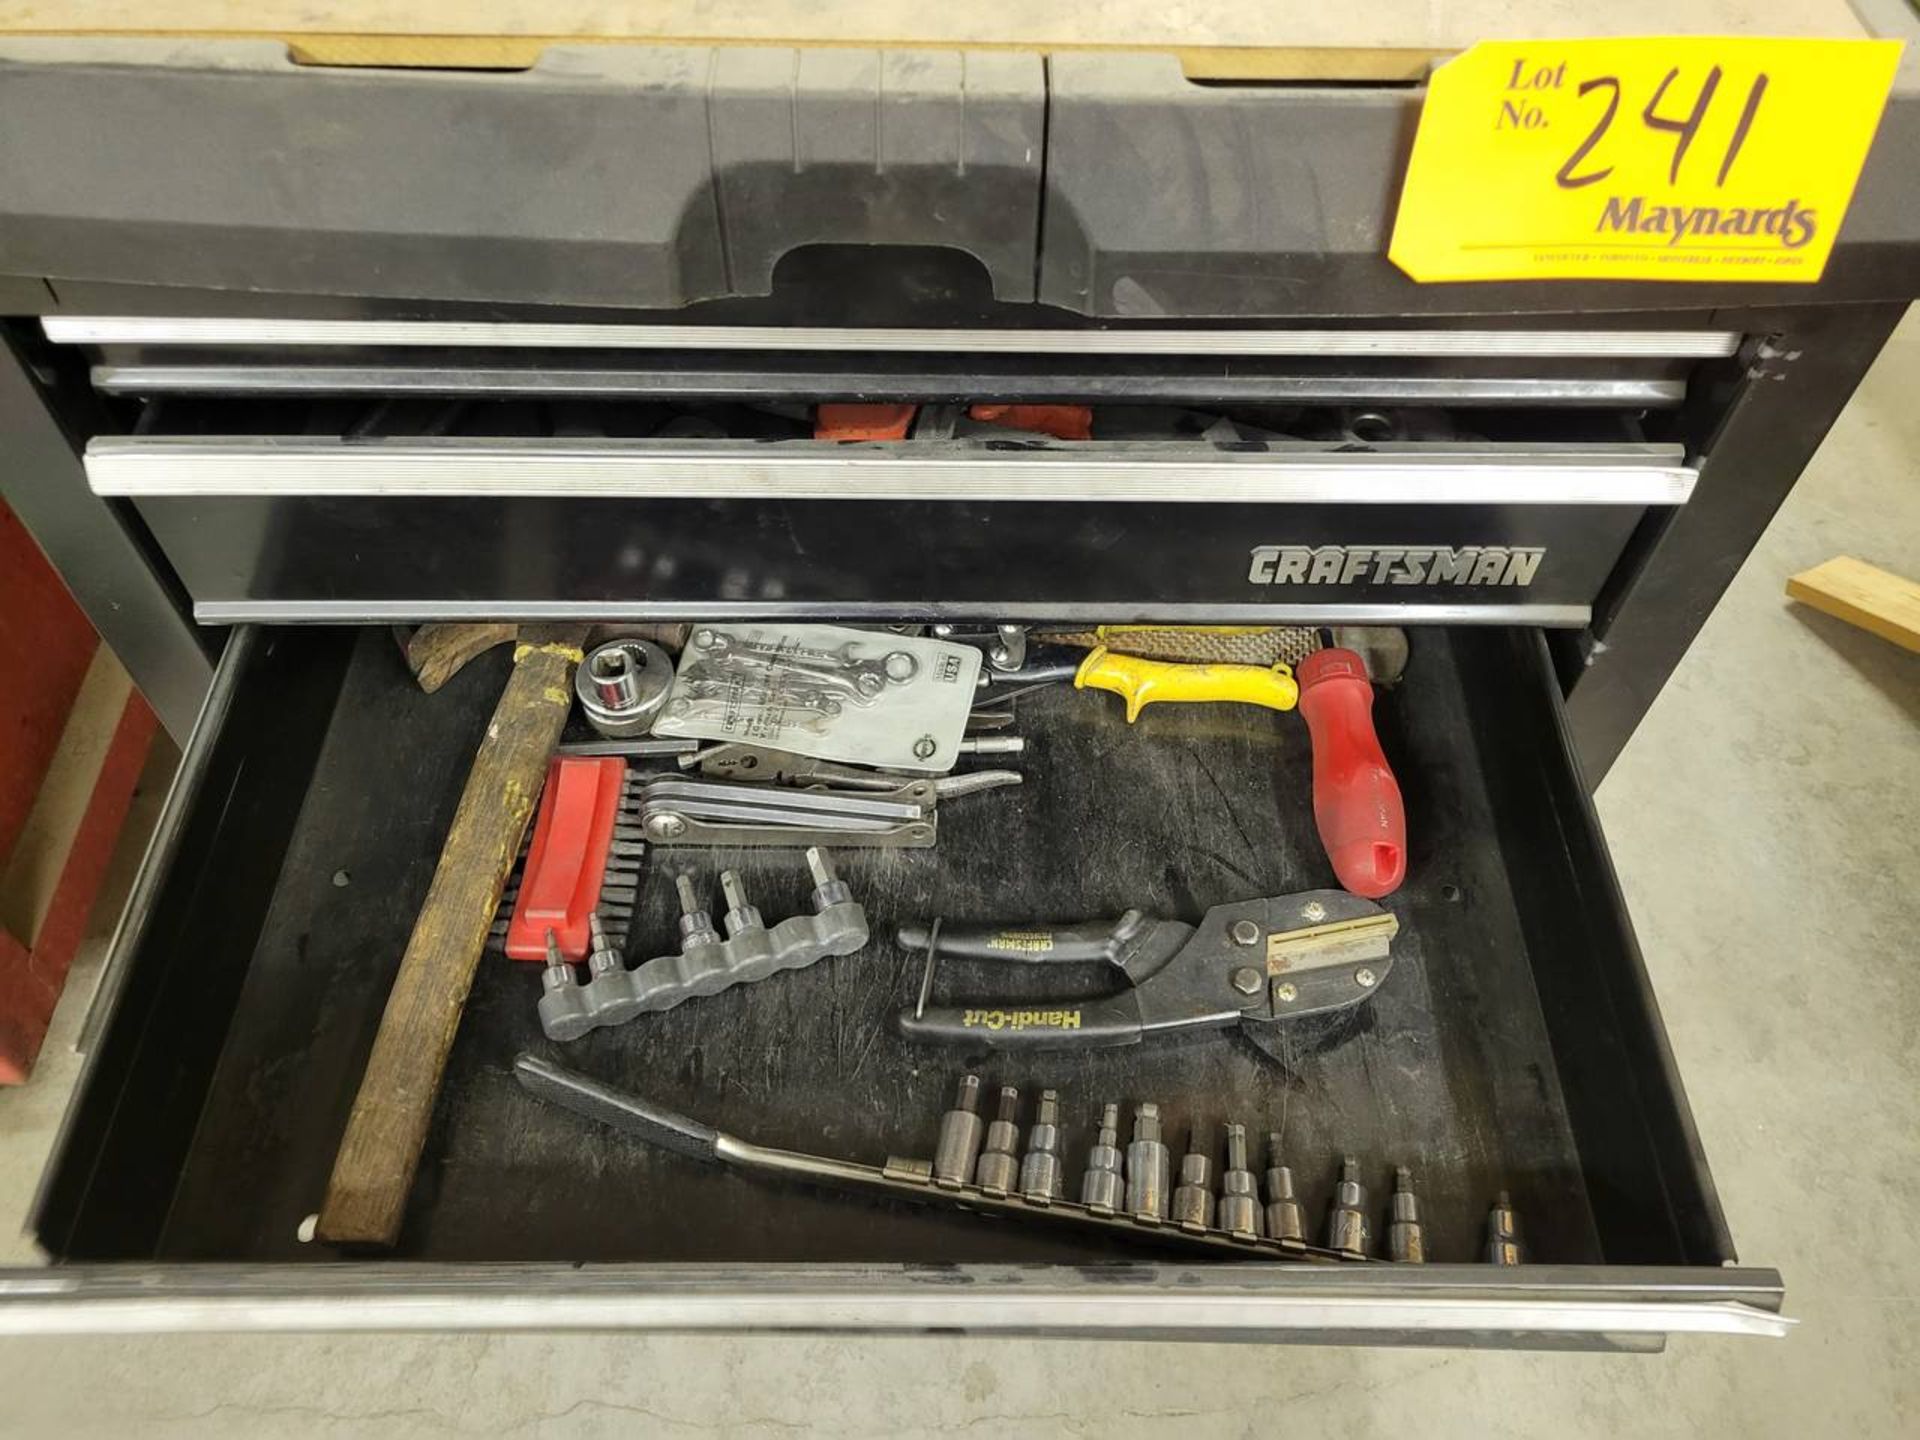 Craftsman 5dr rolling tool cabinet with contents - Image 3 of 4